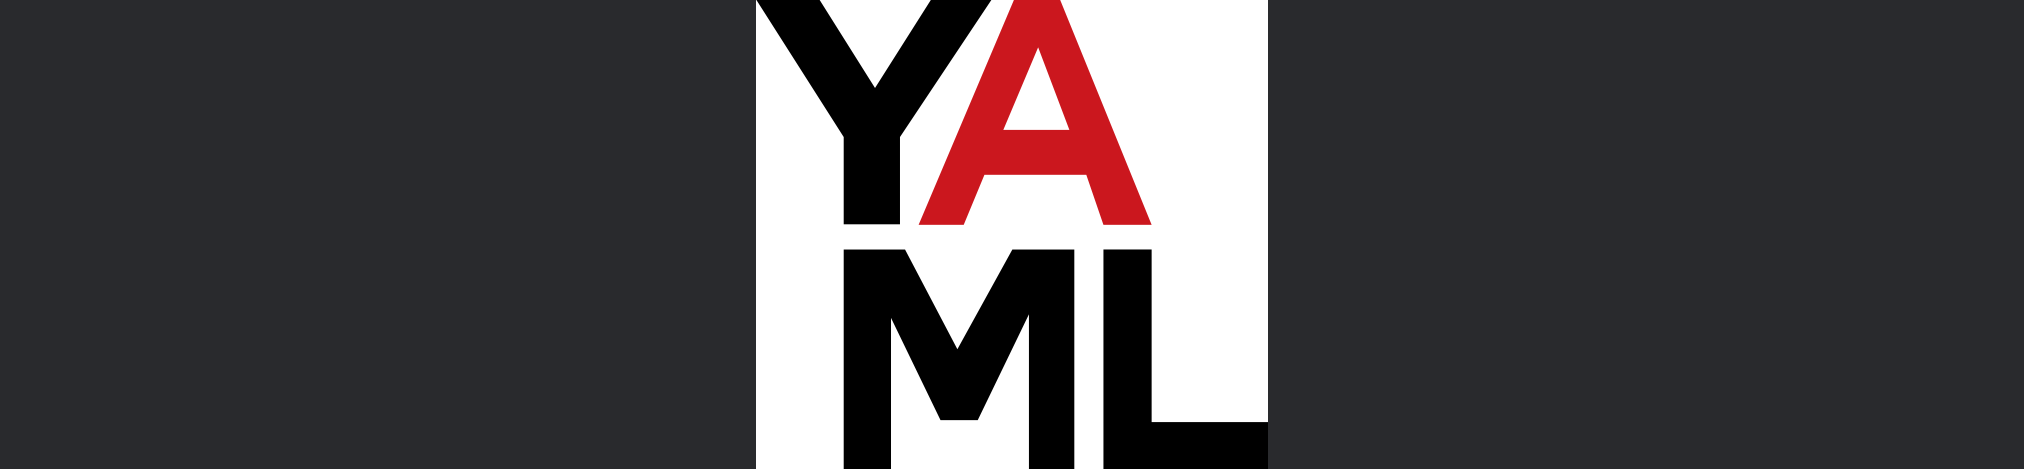 /2022/11/yaml-anchors-and-aliases/Official_YAML_Logo.png